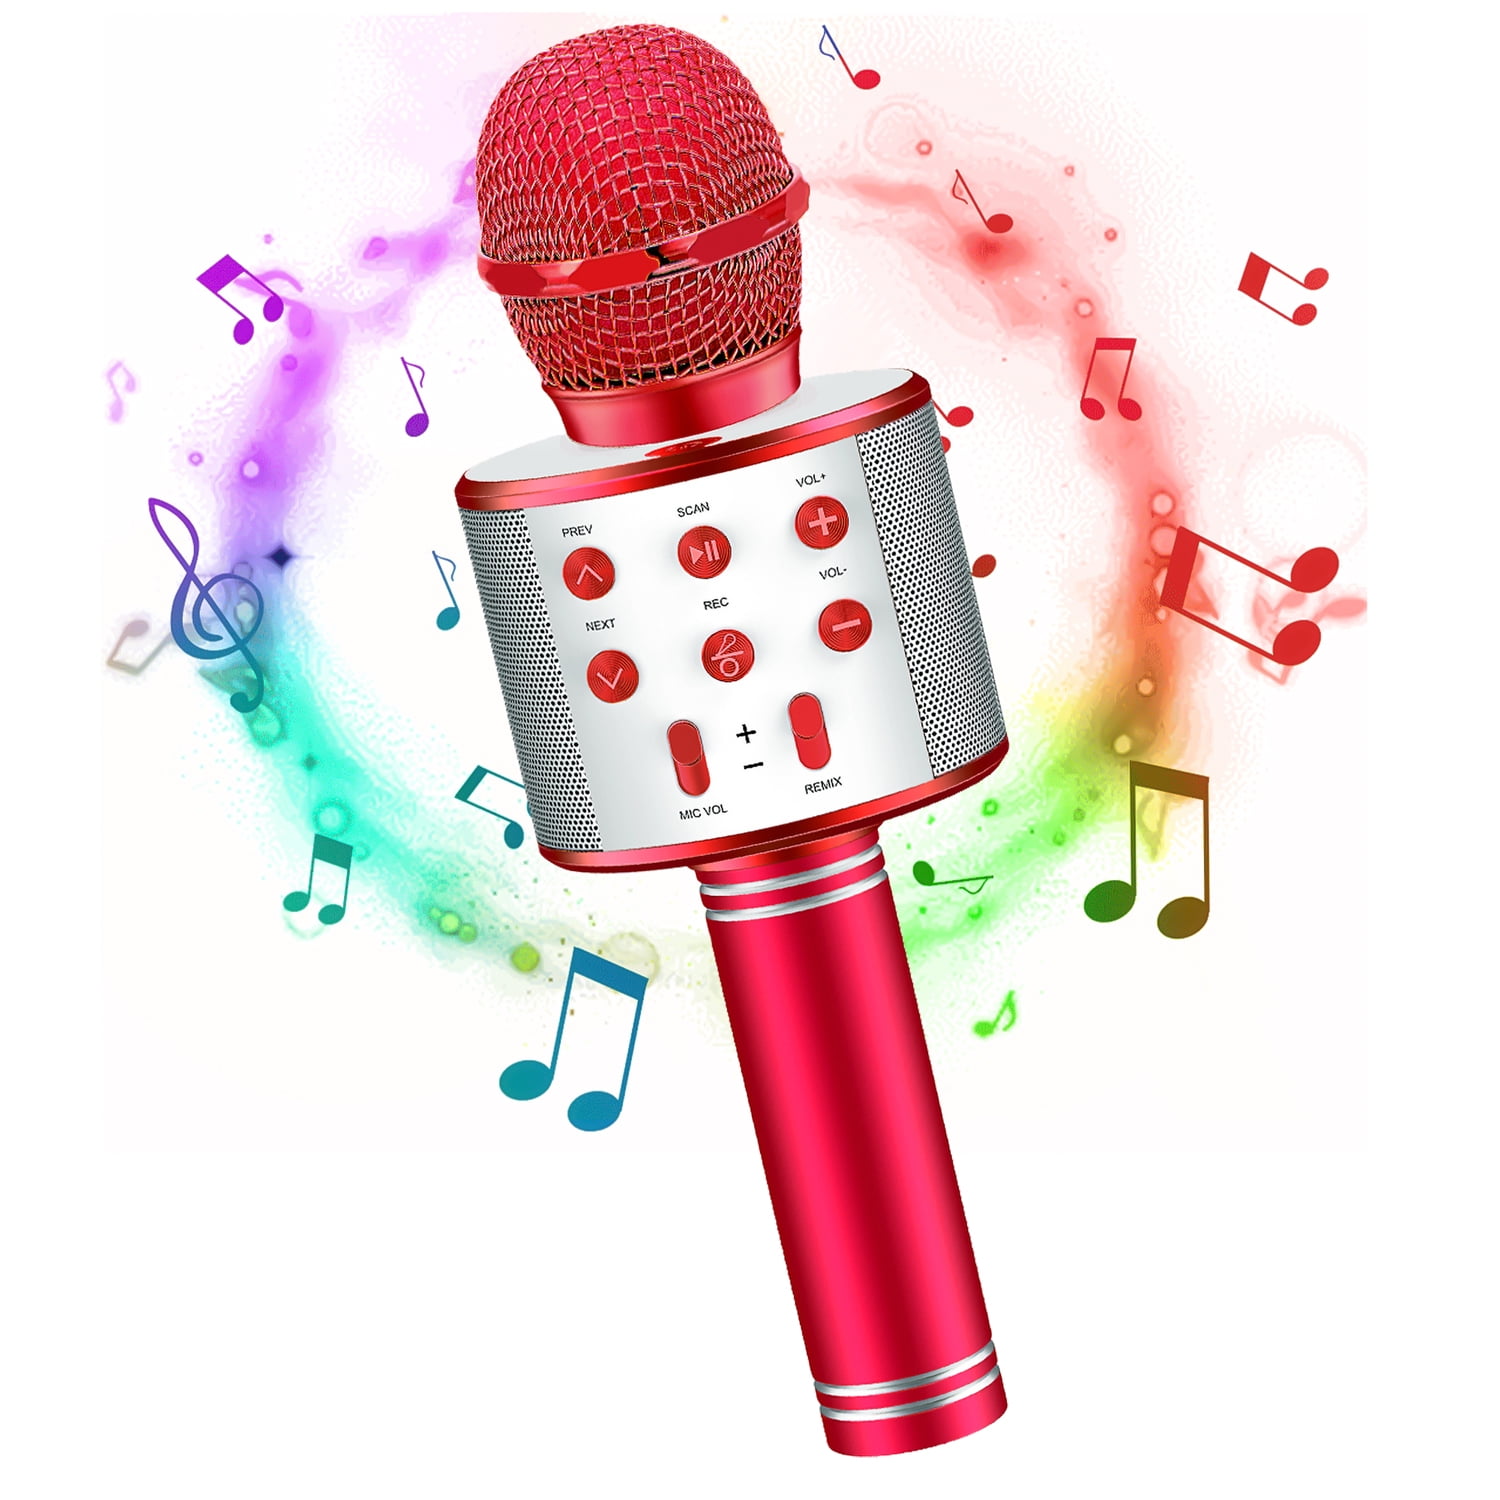 Wireless Bluetooth Karaoke Microphone, 4 in 1 Handheld Mic Speaker Machine Kid Adult Fit for Android/iPhone/iPad/PC